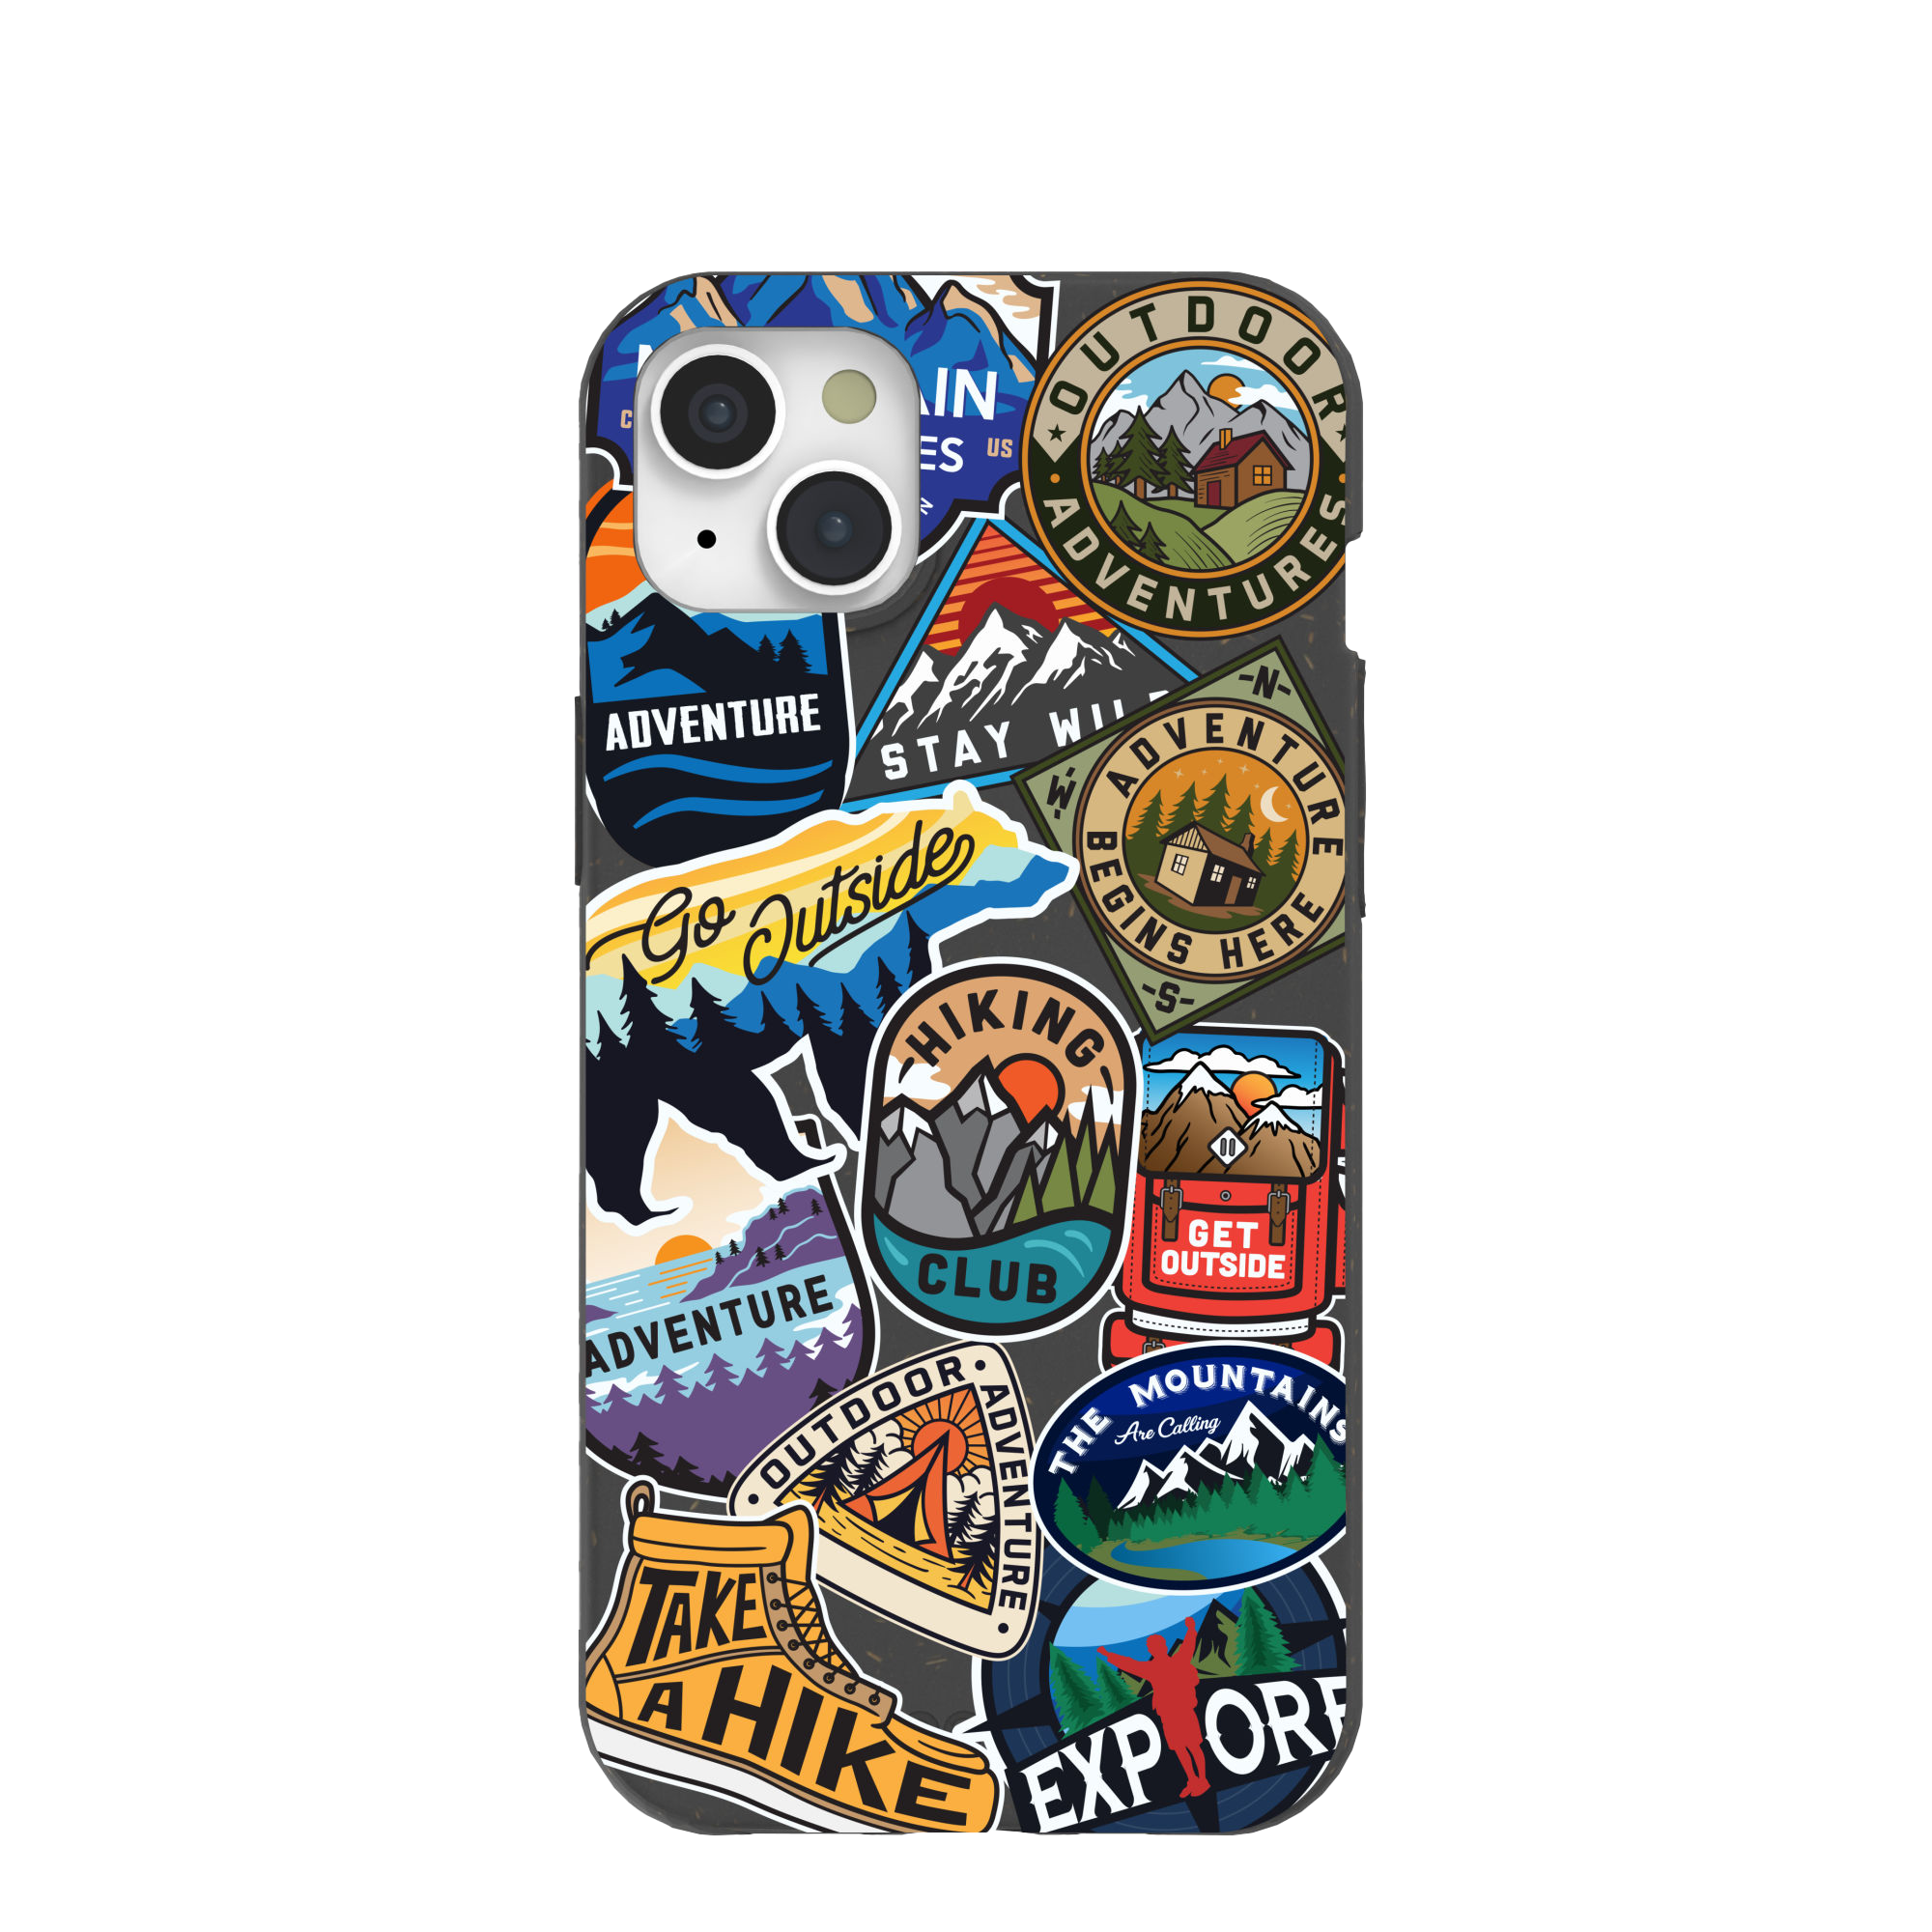 Smartphone case covered in colorful outdoor adventure-themed stickers.